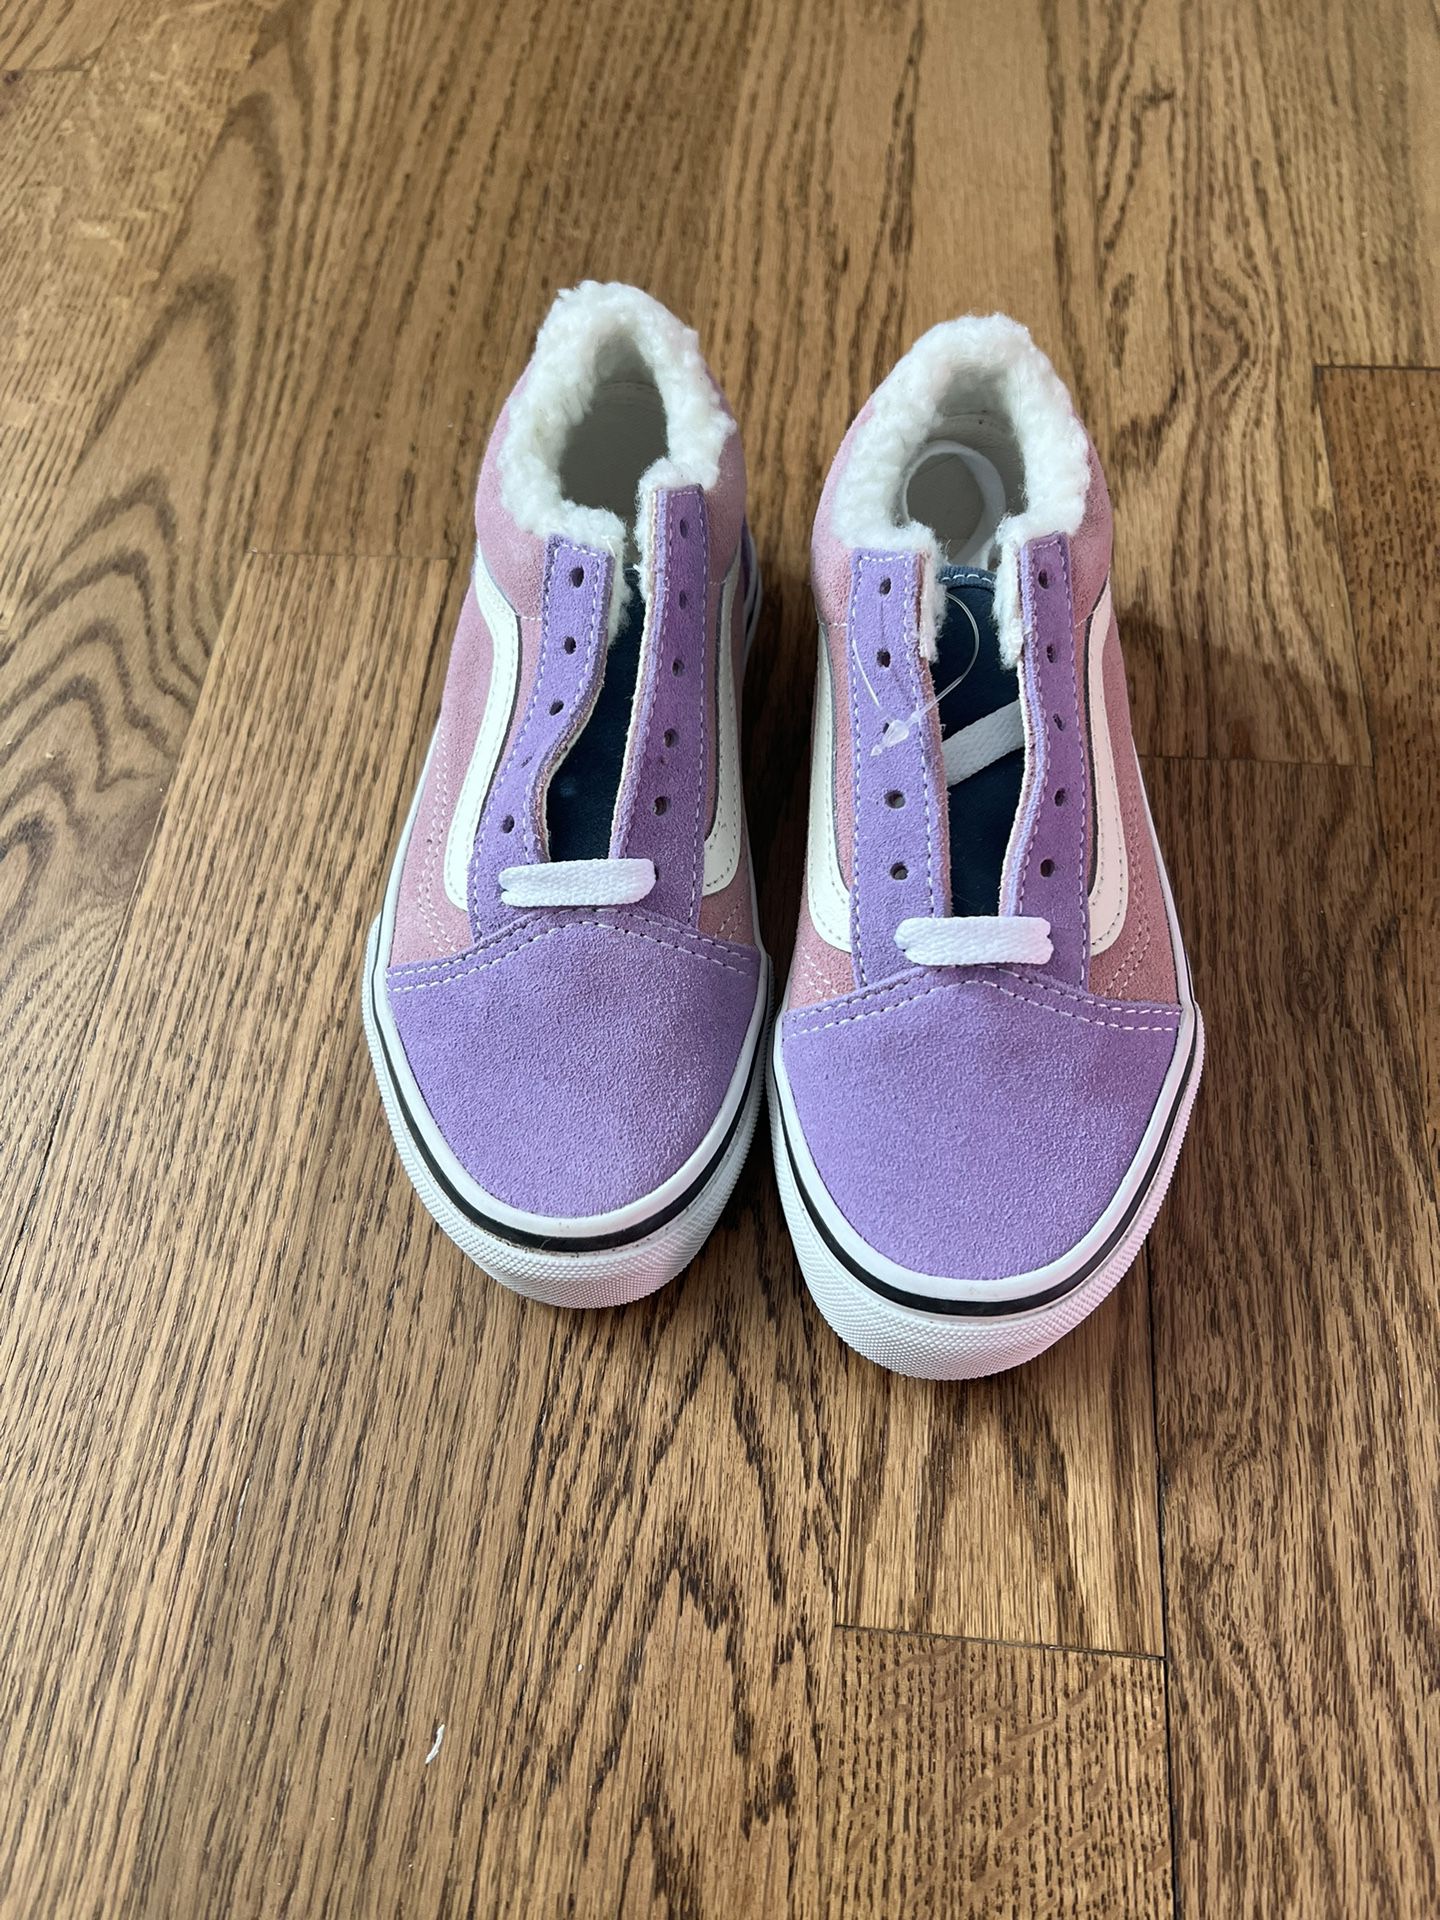 Little girl shoes